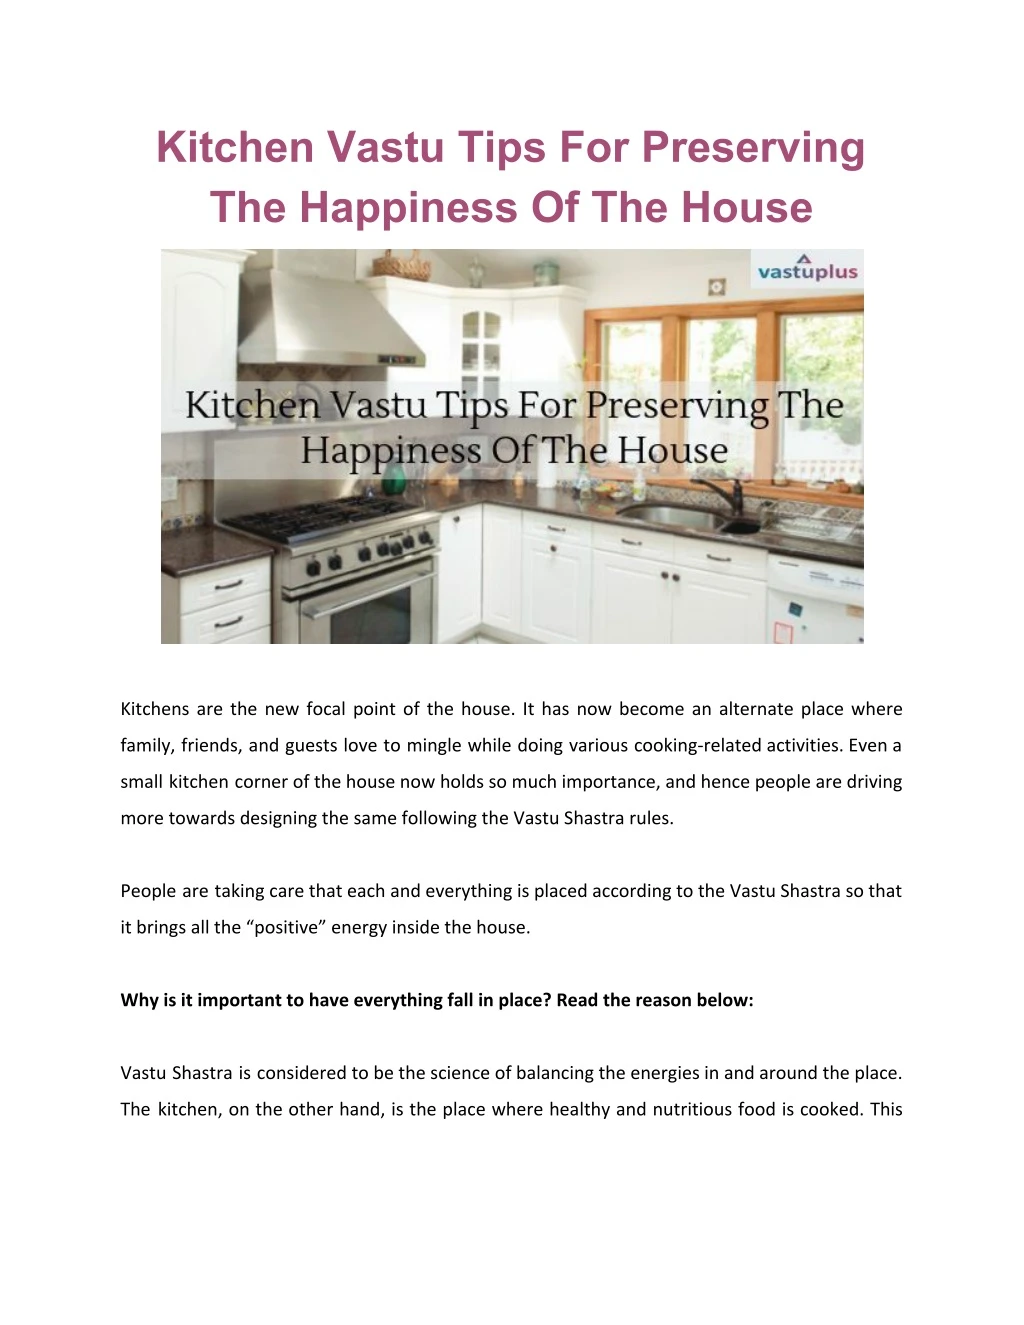 kitchen vastu tips for preserving the happiness